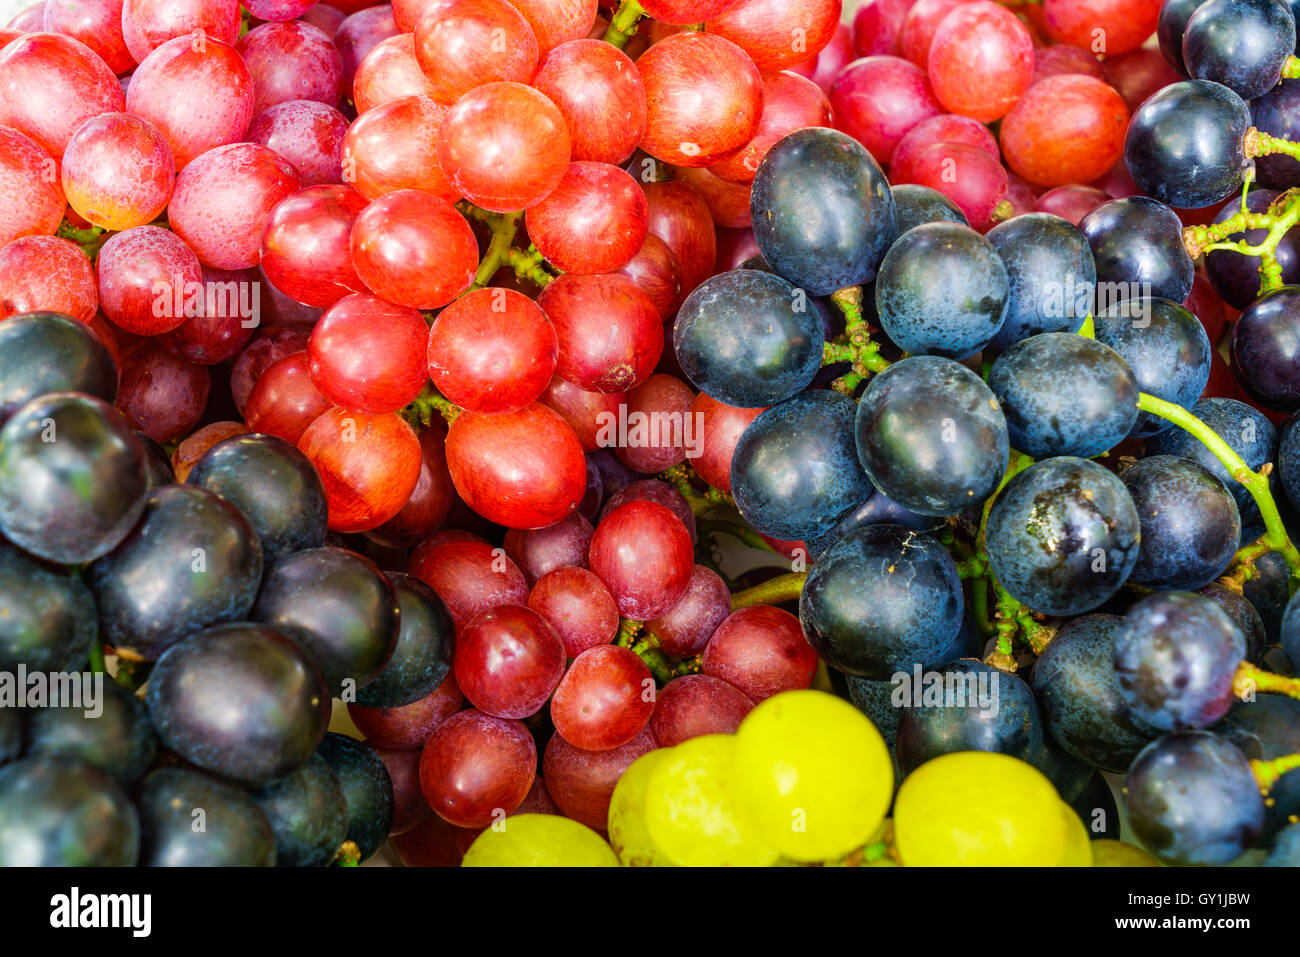 Pile of Red, Black and White Grapes Stock Photo